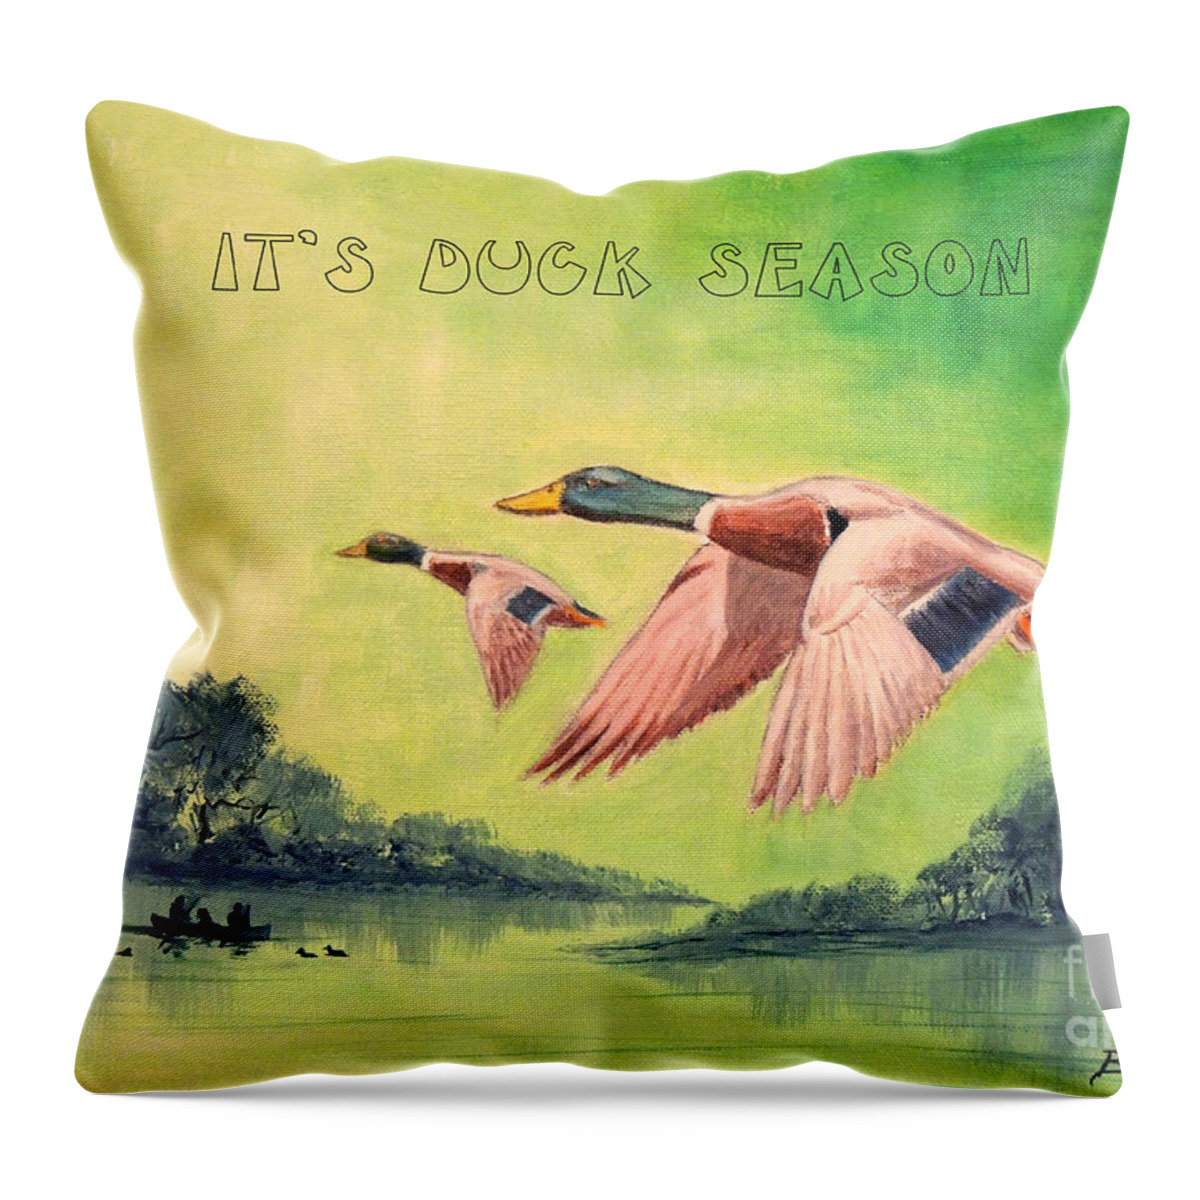 It's Duck Season Throw Pillow featuring the painting IT's DUCK SEASON by Bill Holkham